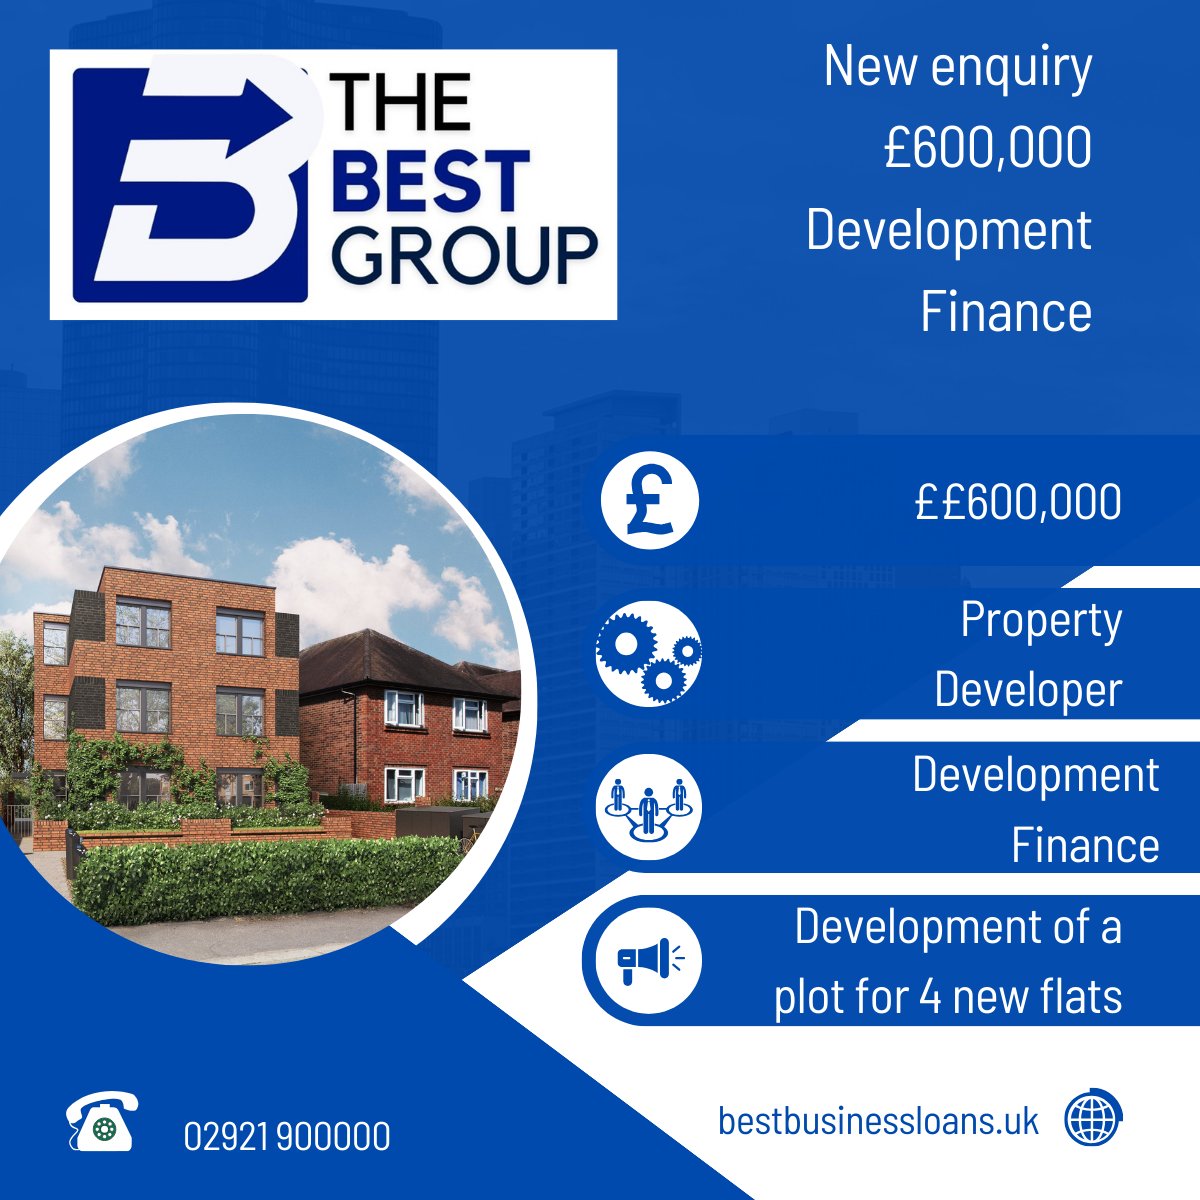 Looking for development finance? Search over 105 lenders for bridging and development finance here:

thebestbridging.com 

#Property #PropertyInvestors #BridgingLoans #DevelopmentFinance #PropertyDevelopers